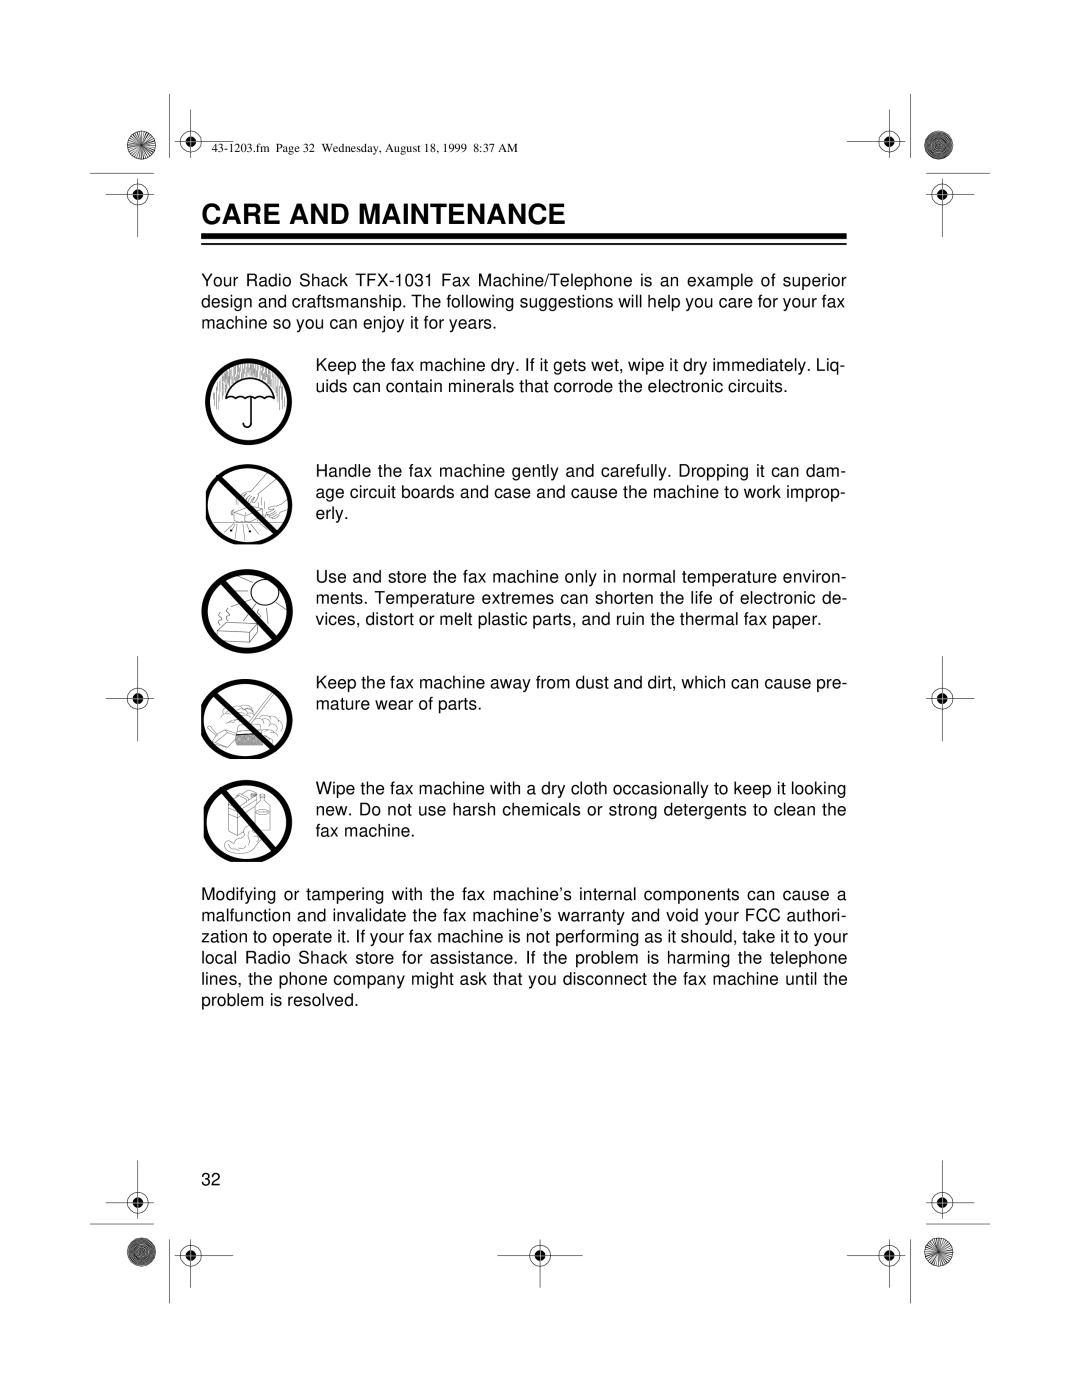 Radio Shack TFX-1031 owner manual Care And Maintenance, fm Page 32 Wednesday, August 18, 1999 837 AM 